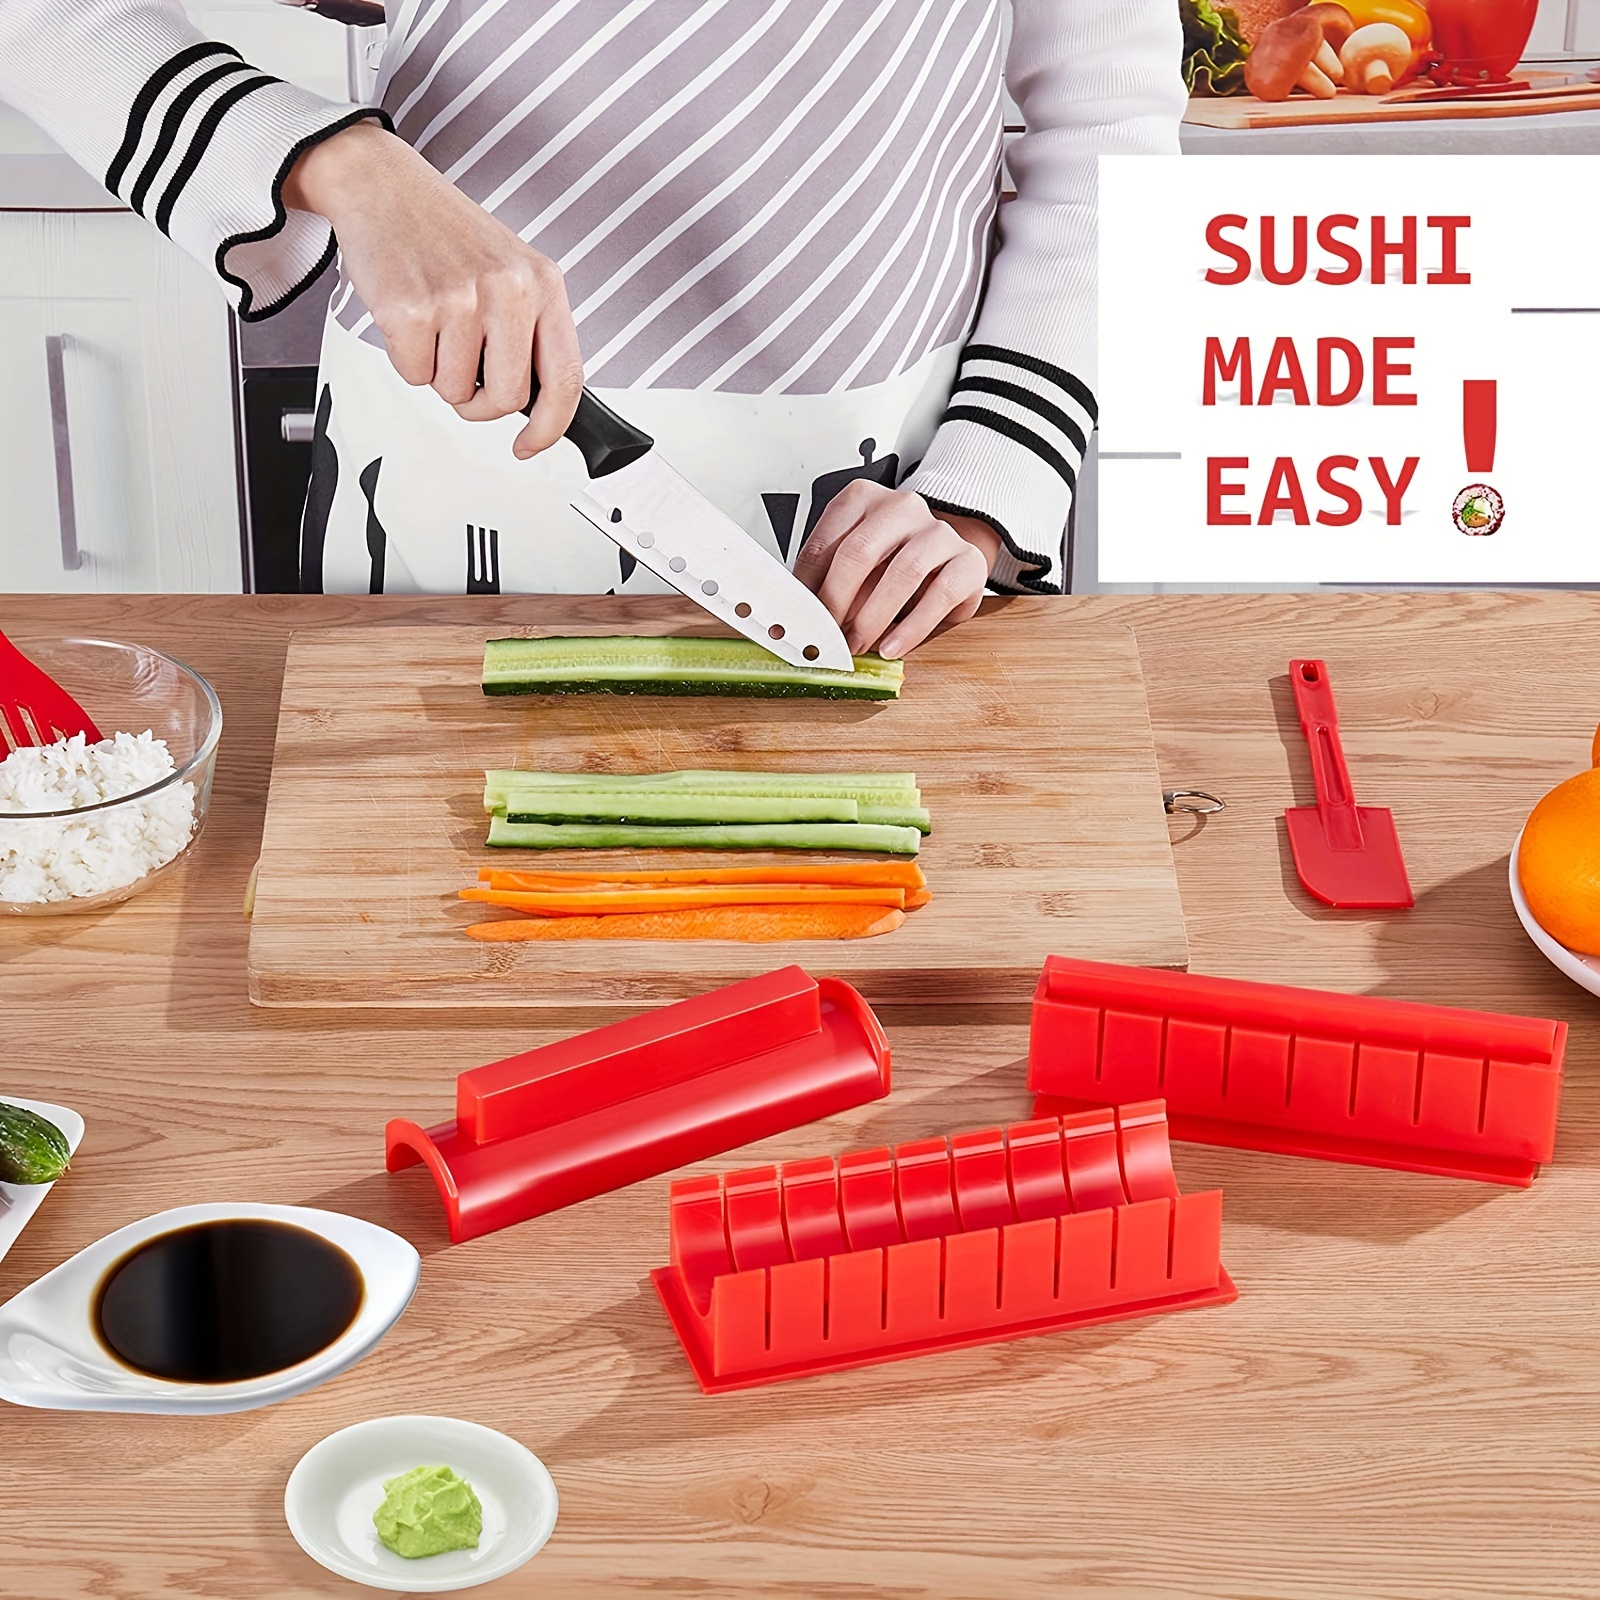 Sushi Making Kit 11 Pieces With 8 Different Sushi Maker Mold Diy Sushi Kit  For Beginners Kids 1 Sushi Knife 1 Spatula 1 Fork, Red